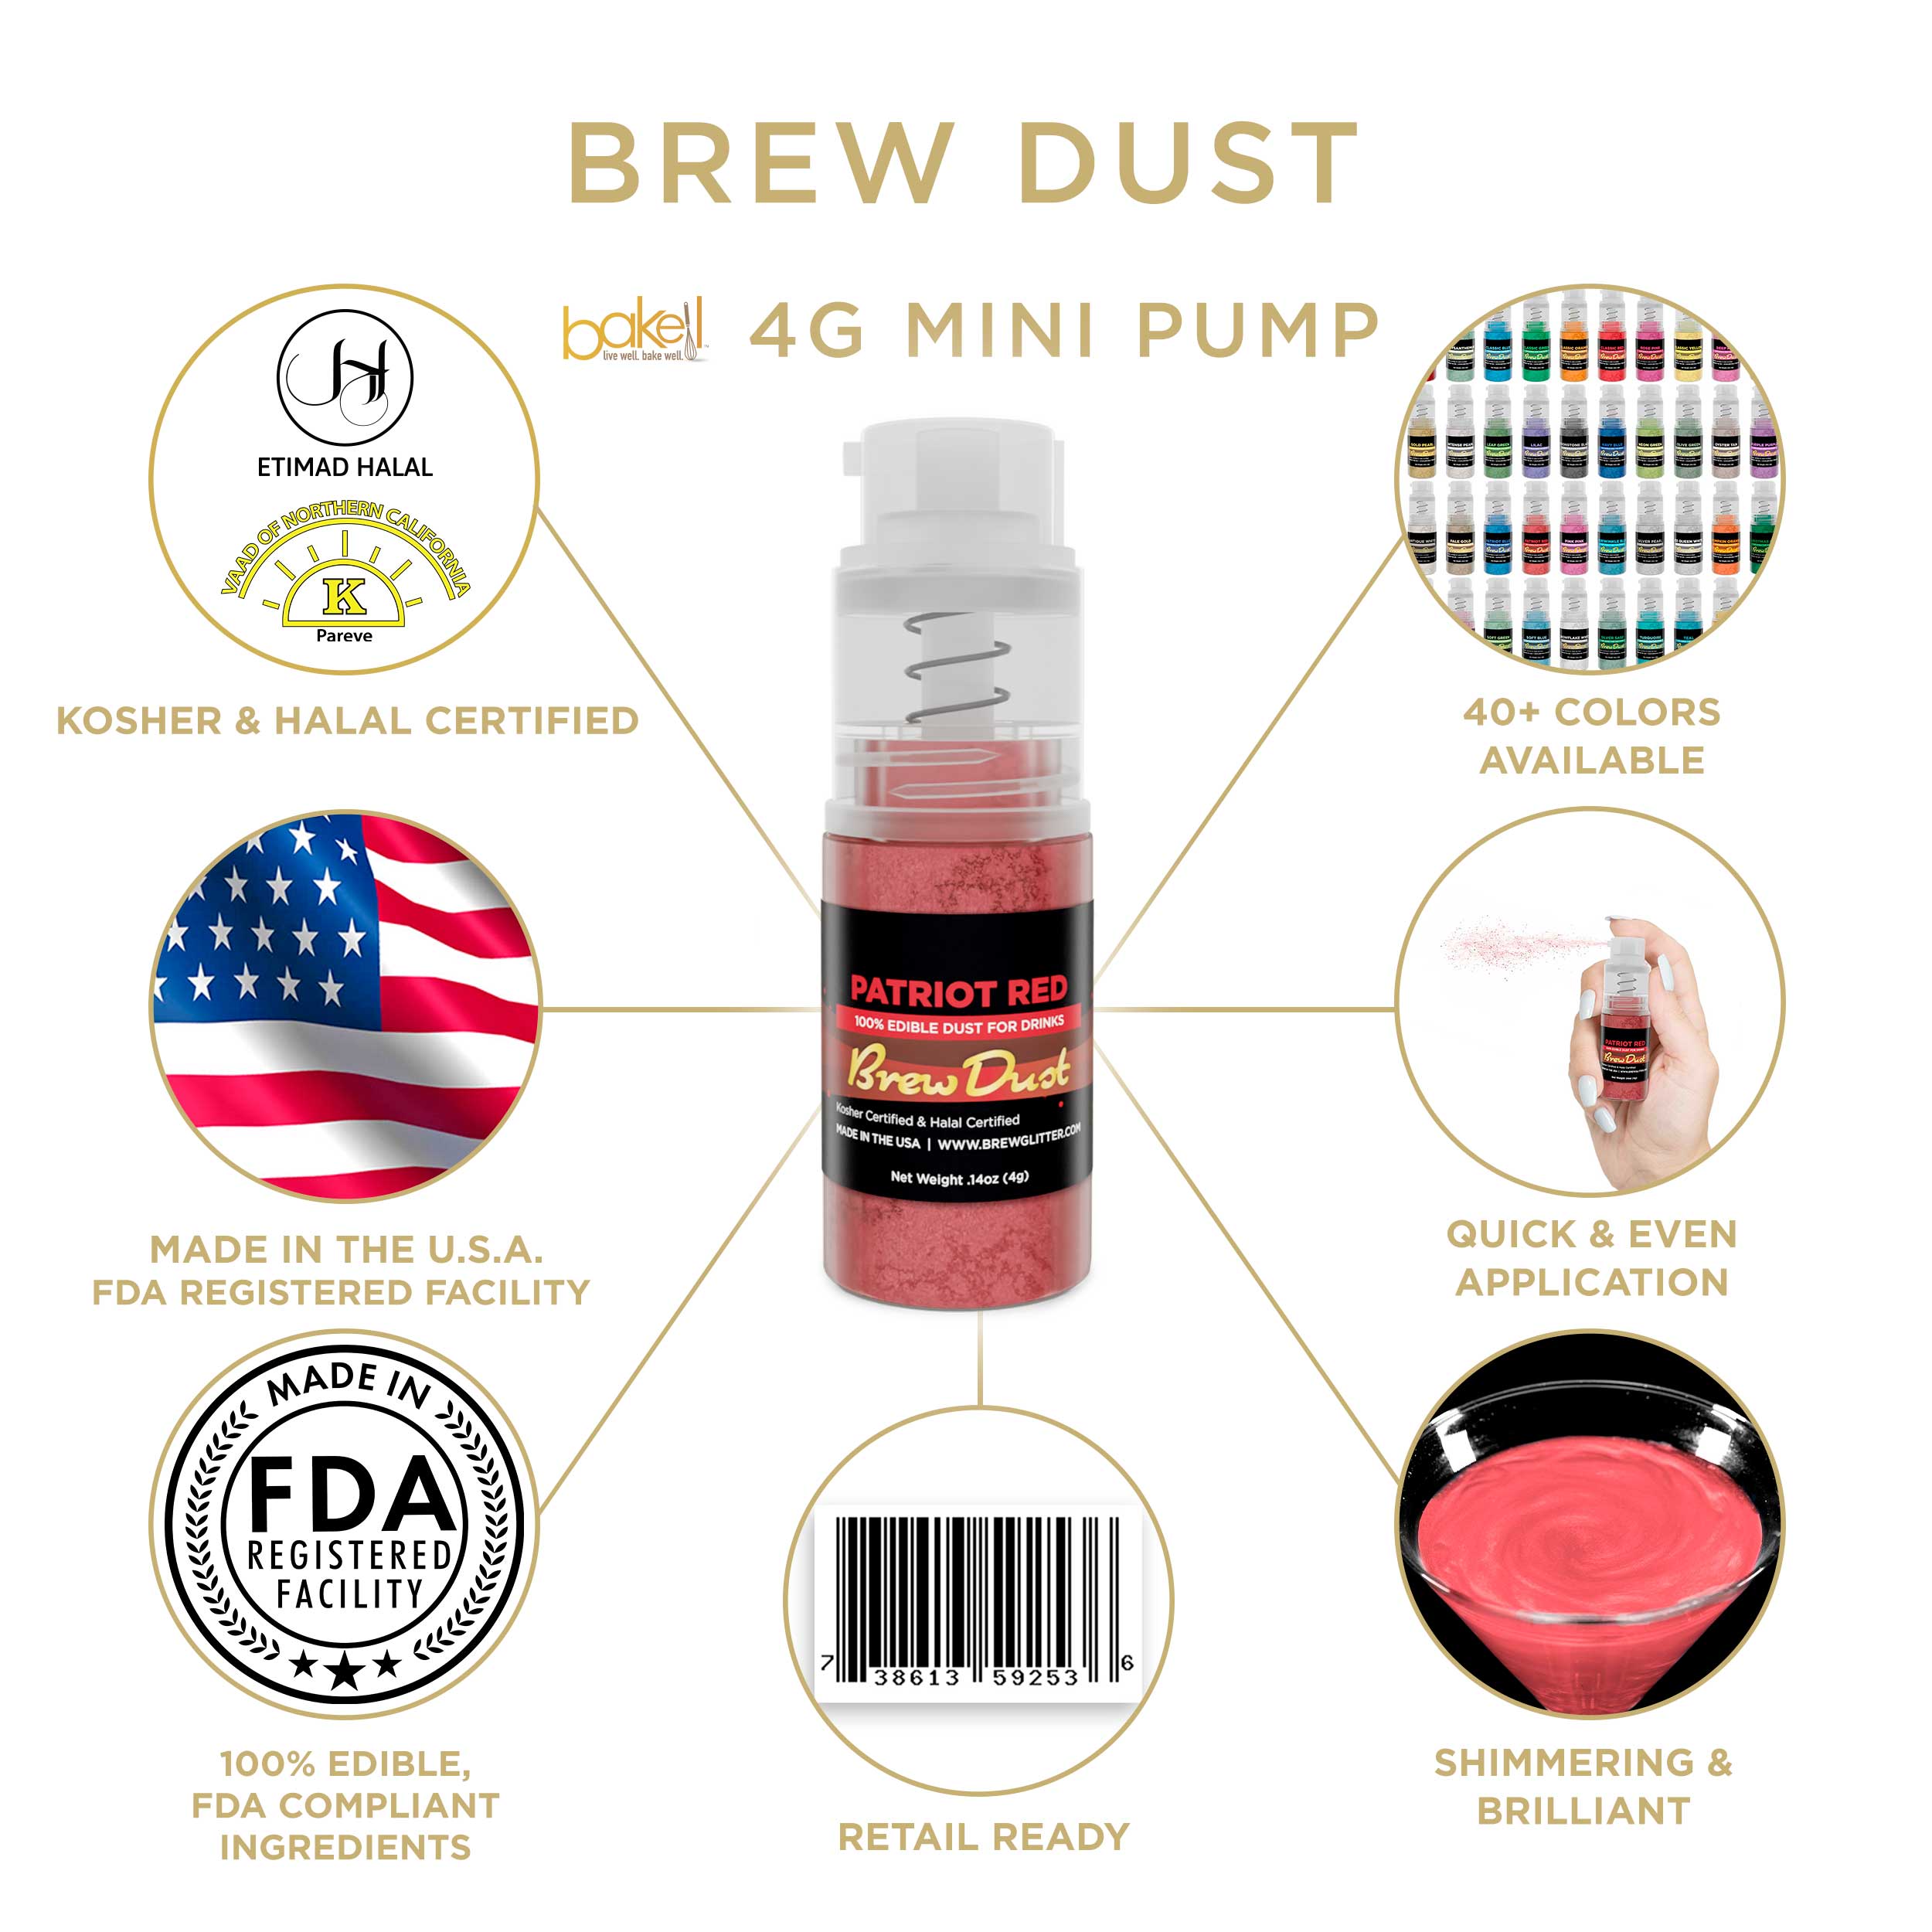 Patriot Red Brew Dust Miniature Spray Pump | Infographic and Information